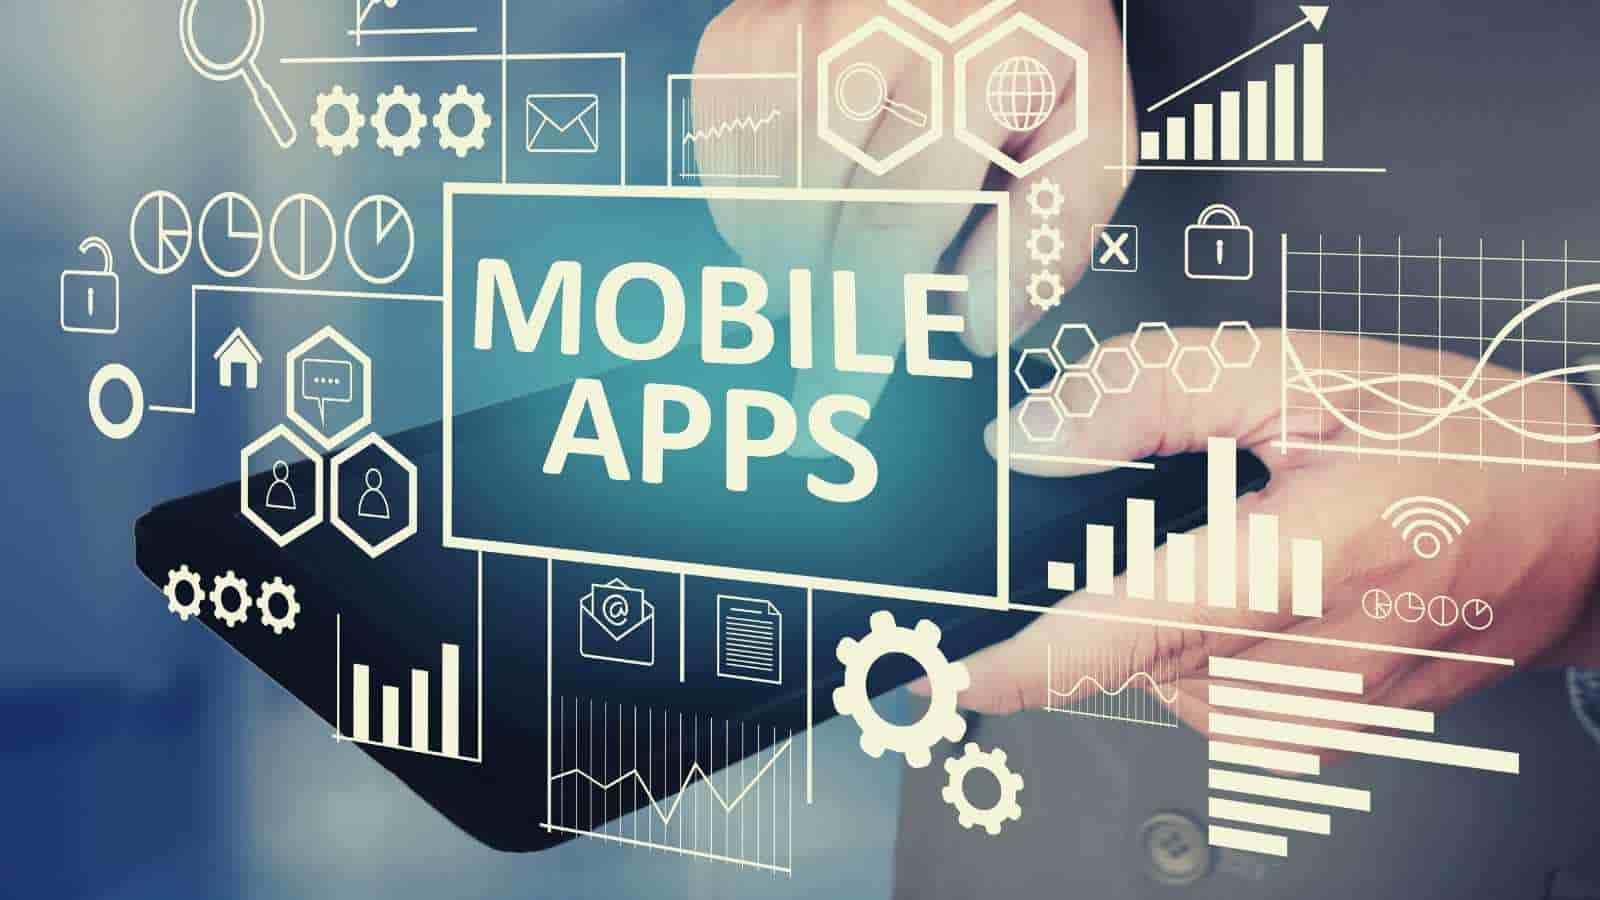 Mobile Apps Stock image